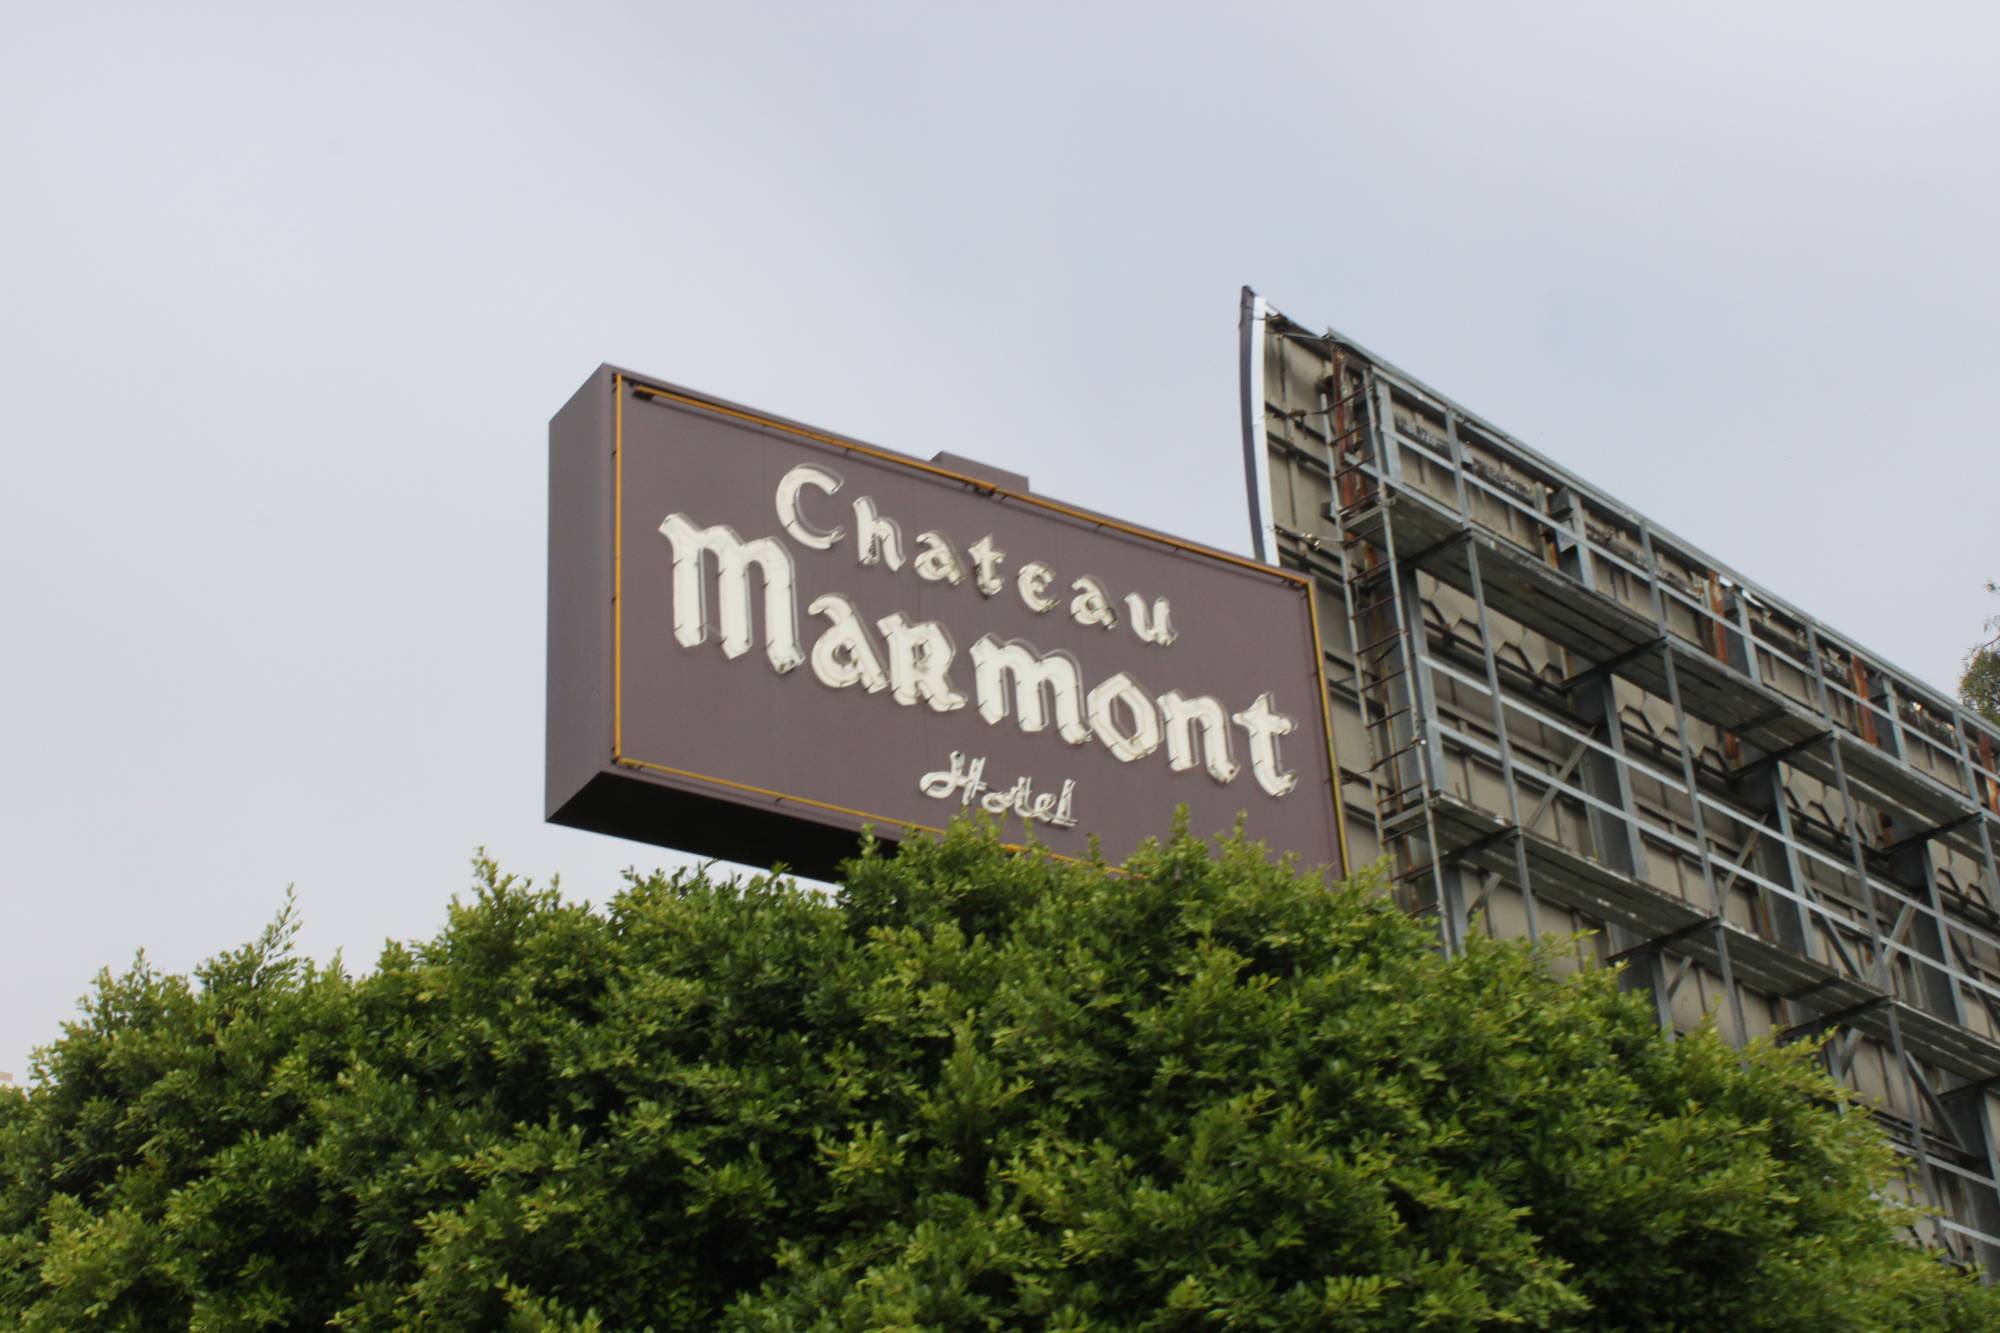 Chateau Marmont sign - Los Angeles